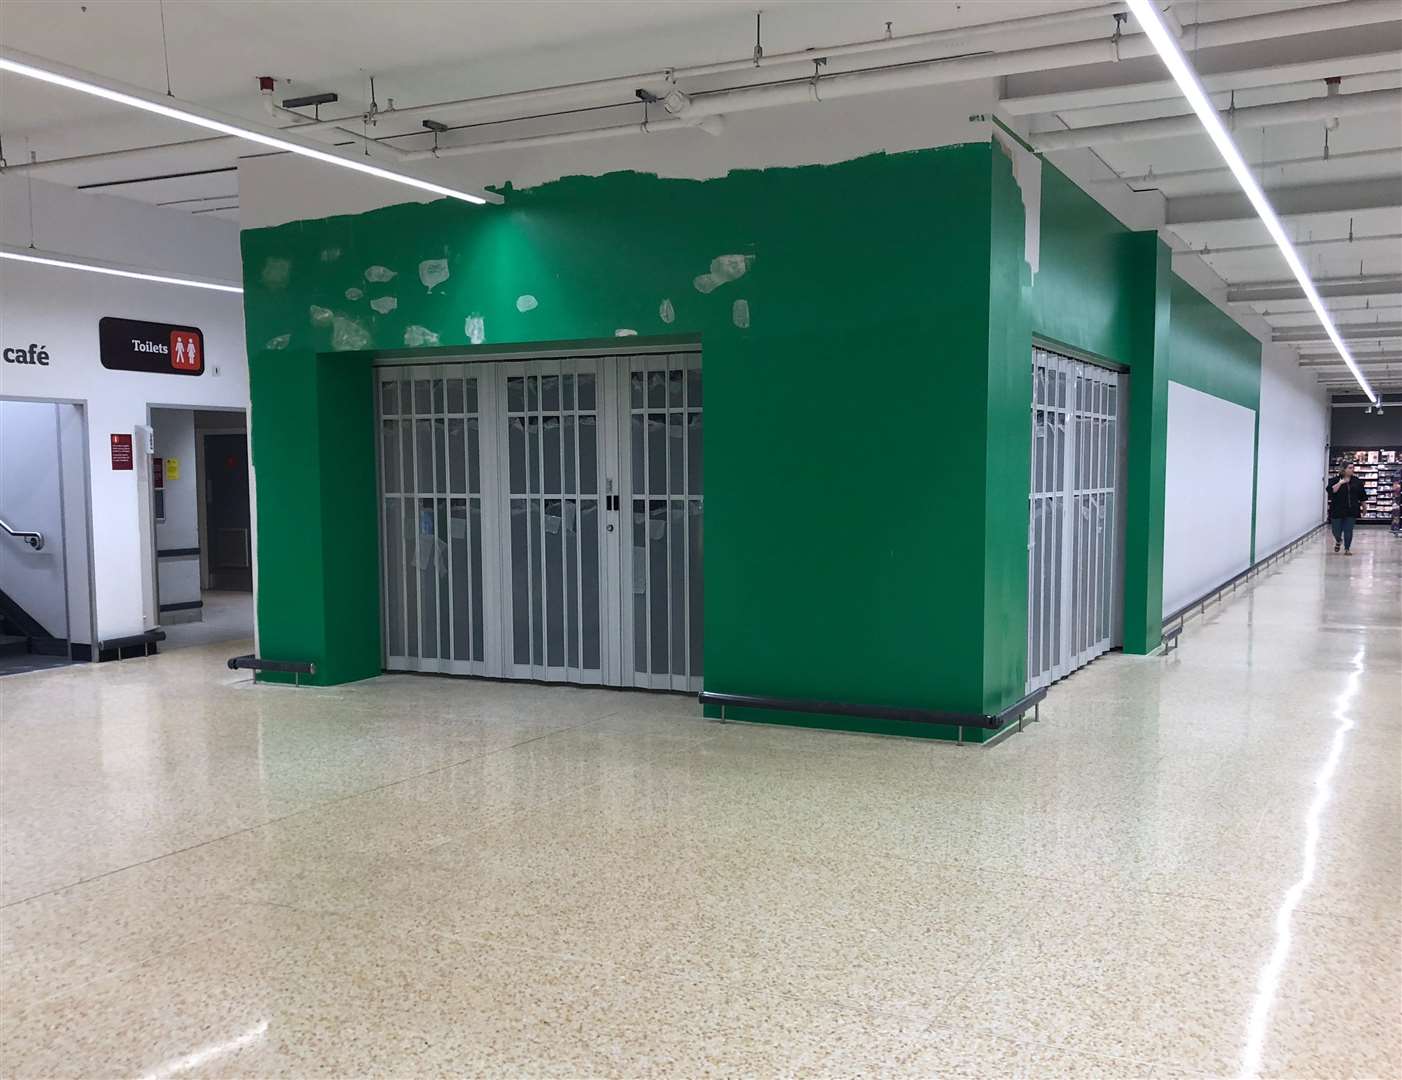 Specsavers' familiar green frontage is already being installed in the supermarket. Picture: Steve Salter